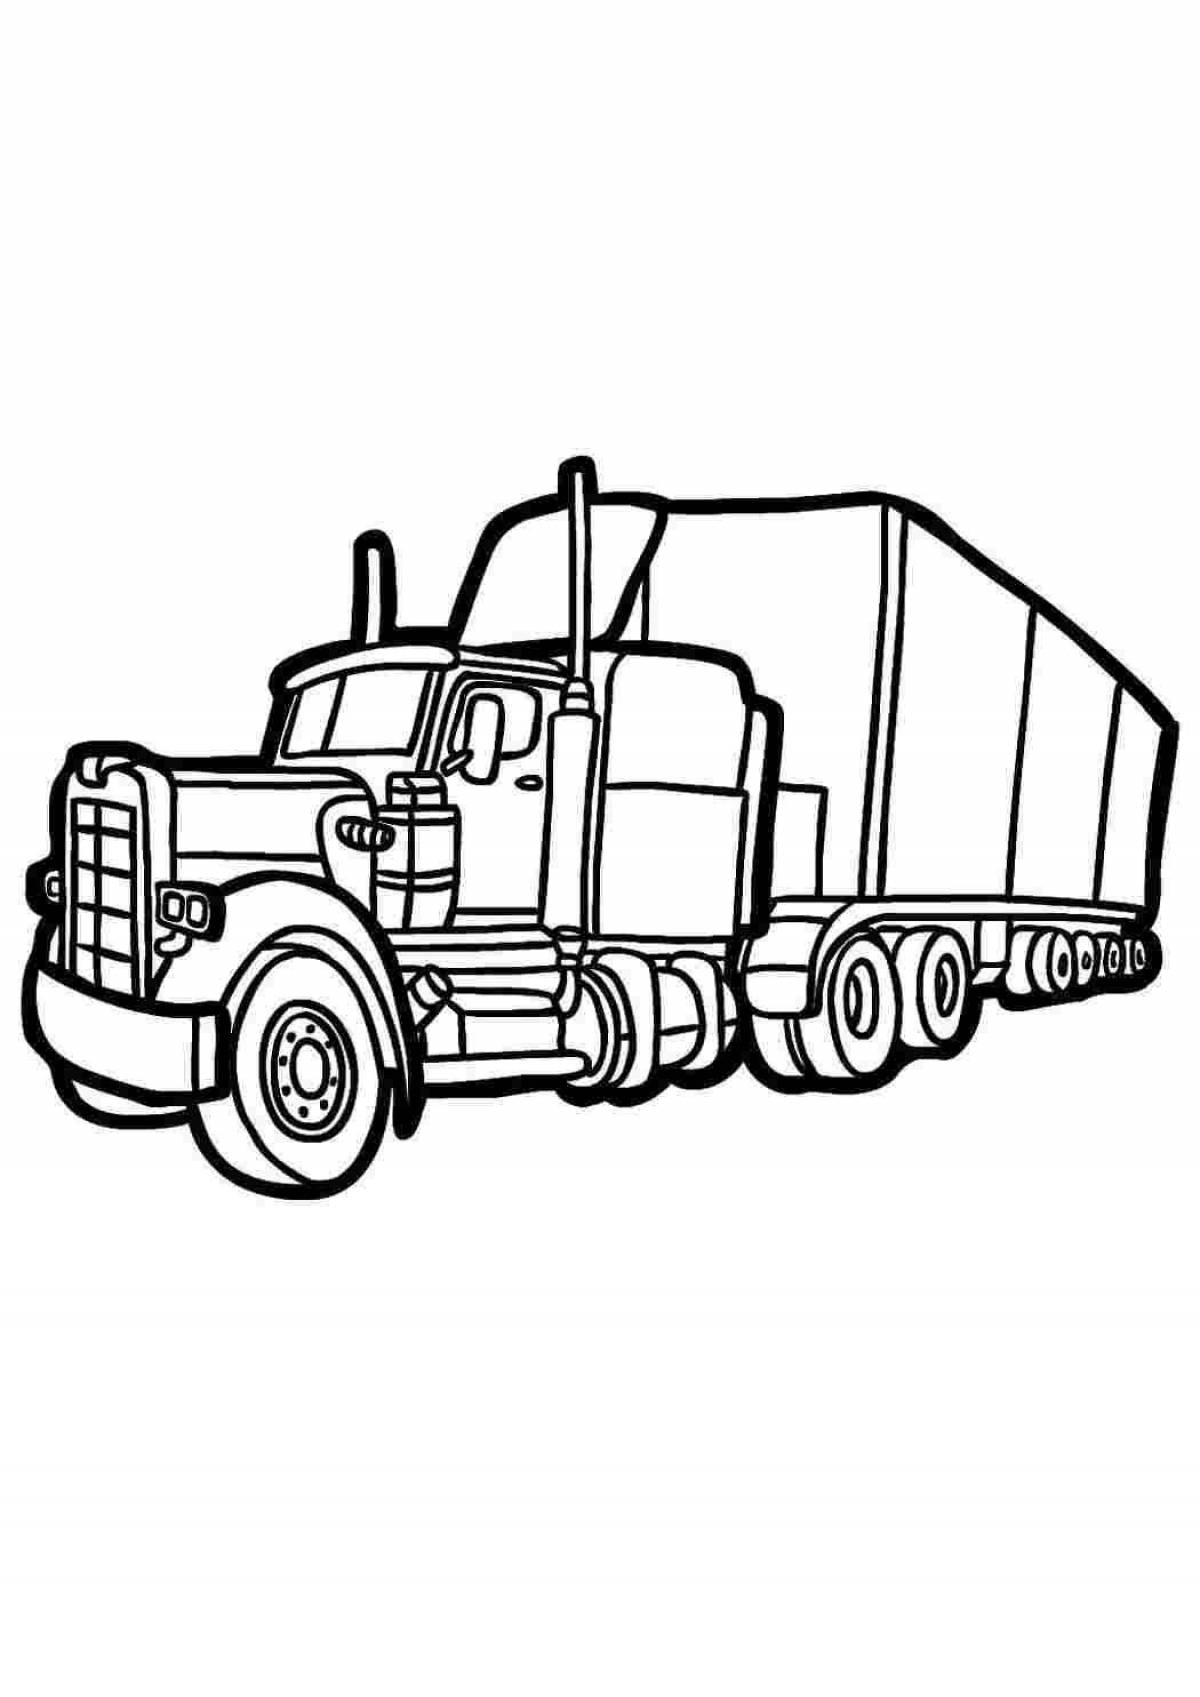 Awesome truck coloring page